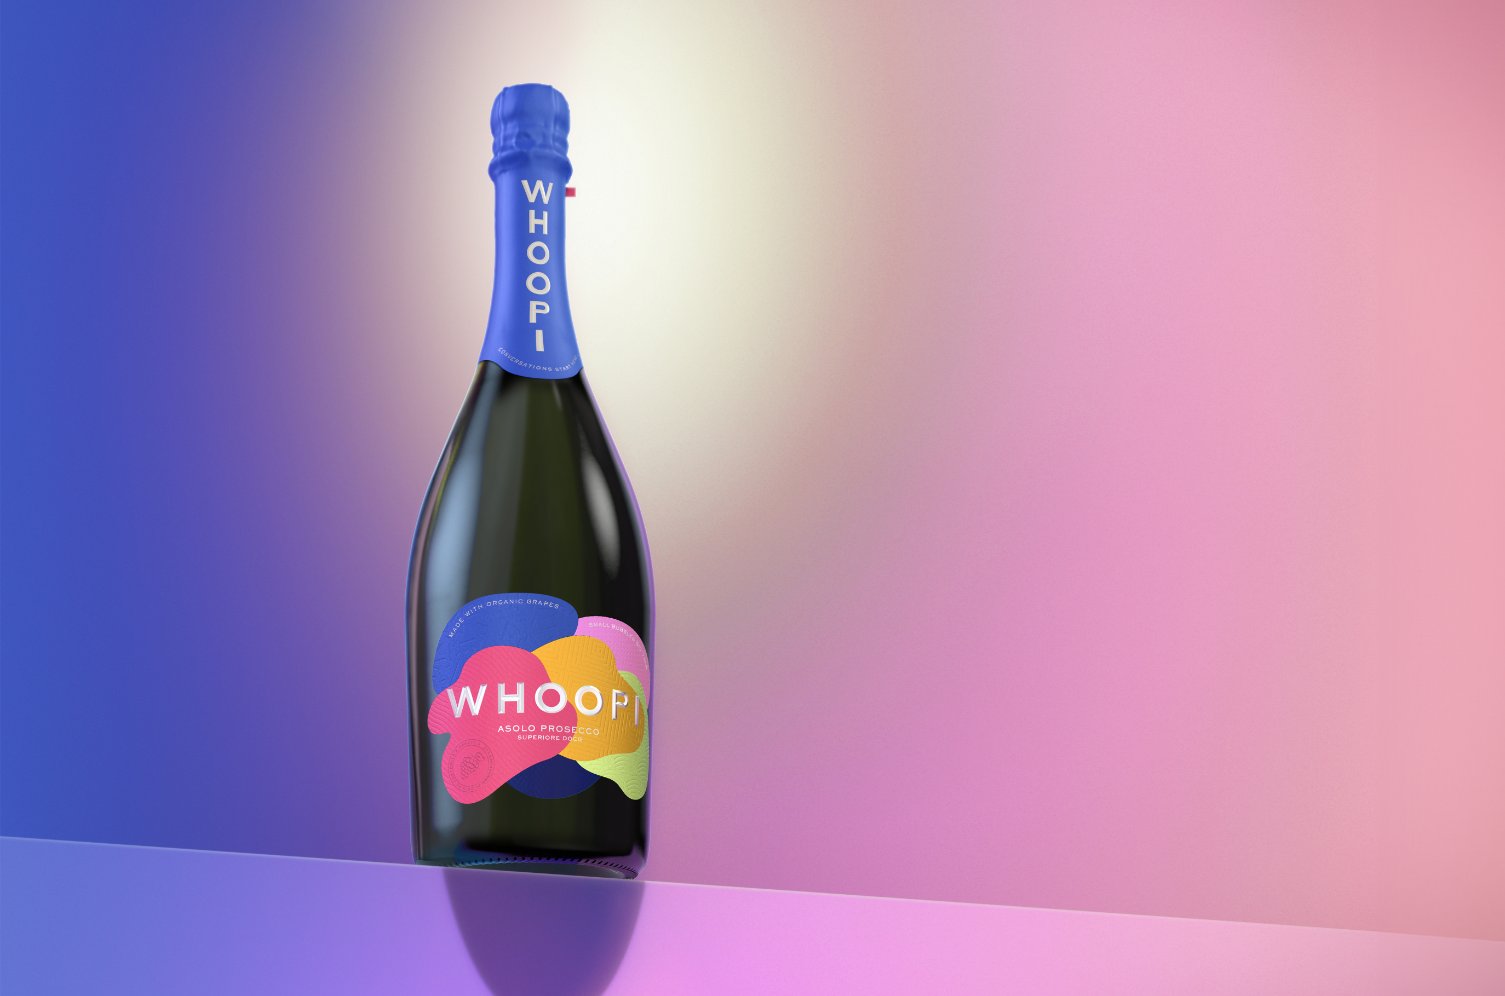 The Only Proper Reaction to This Colorful Prosecco is “Whoopi”